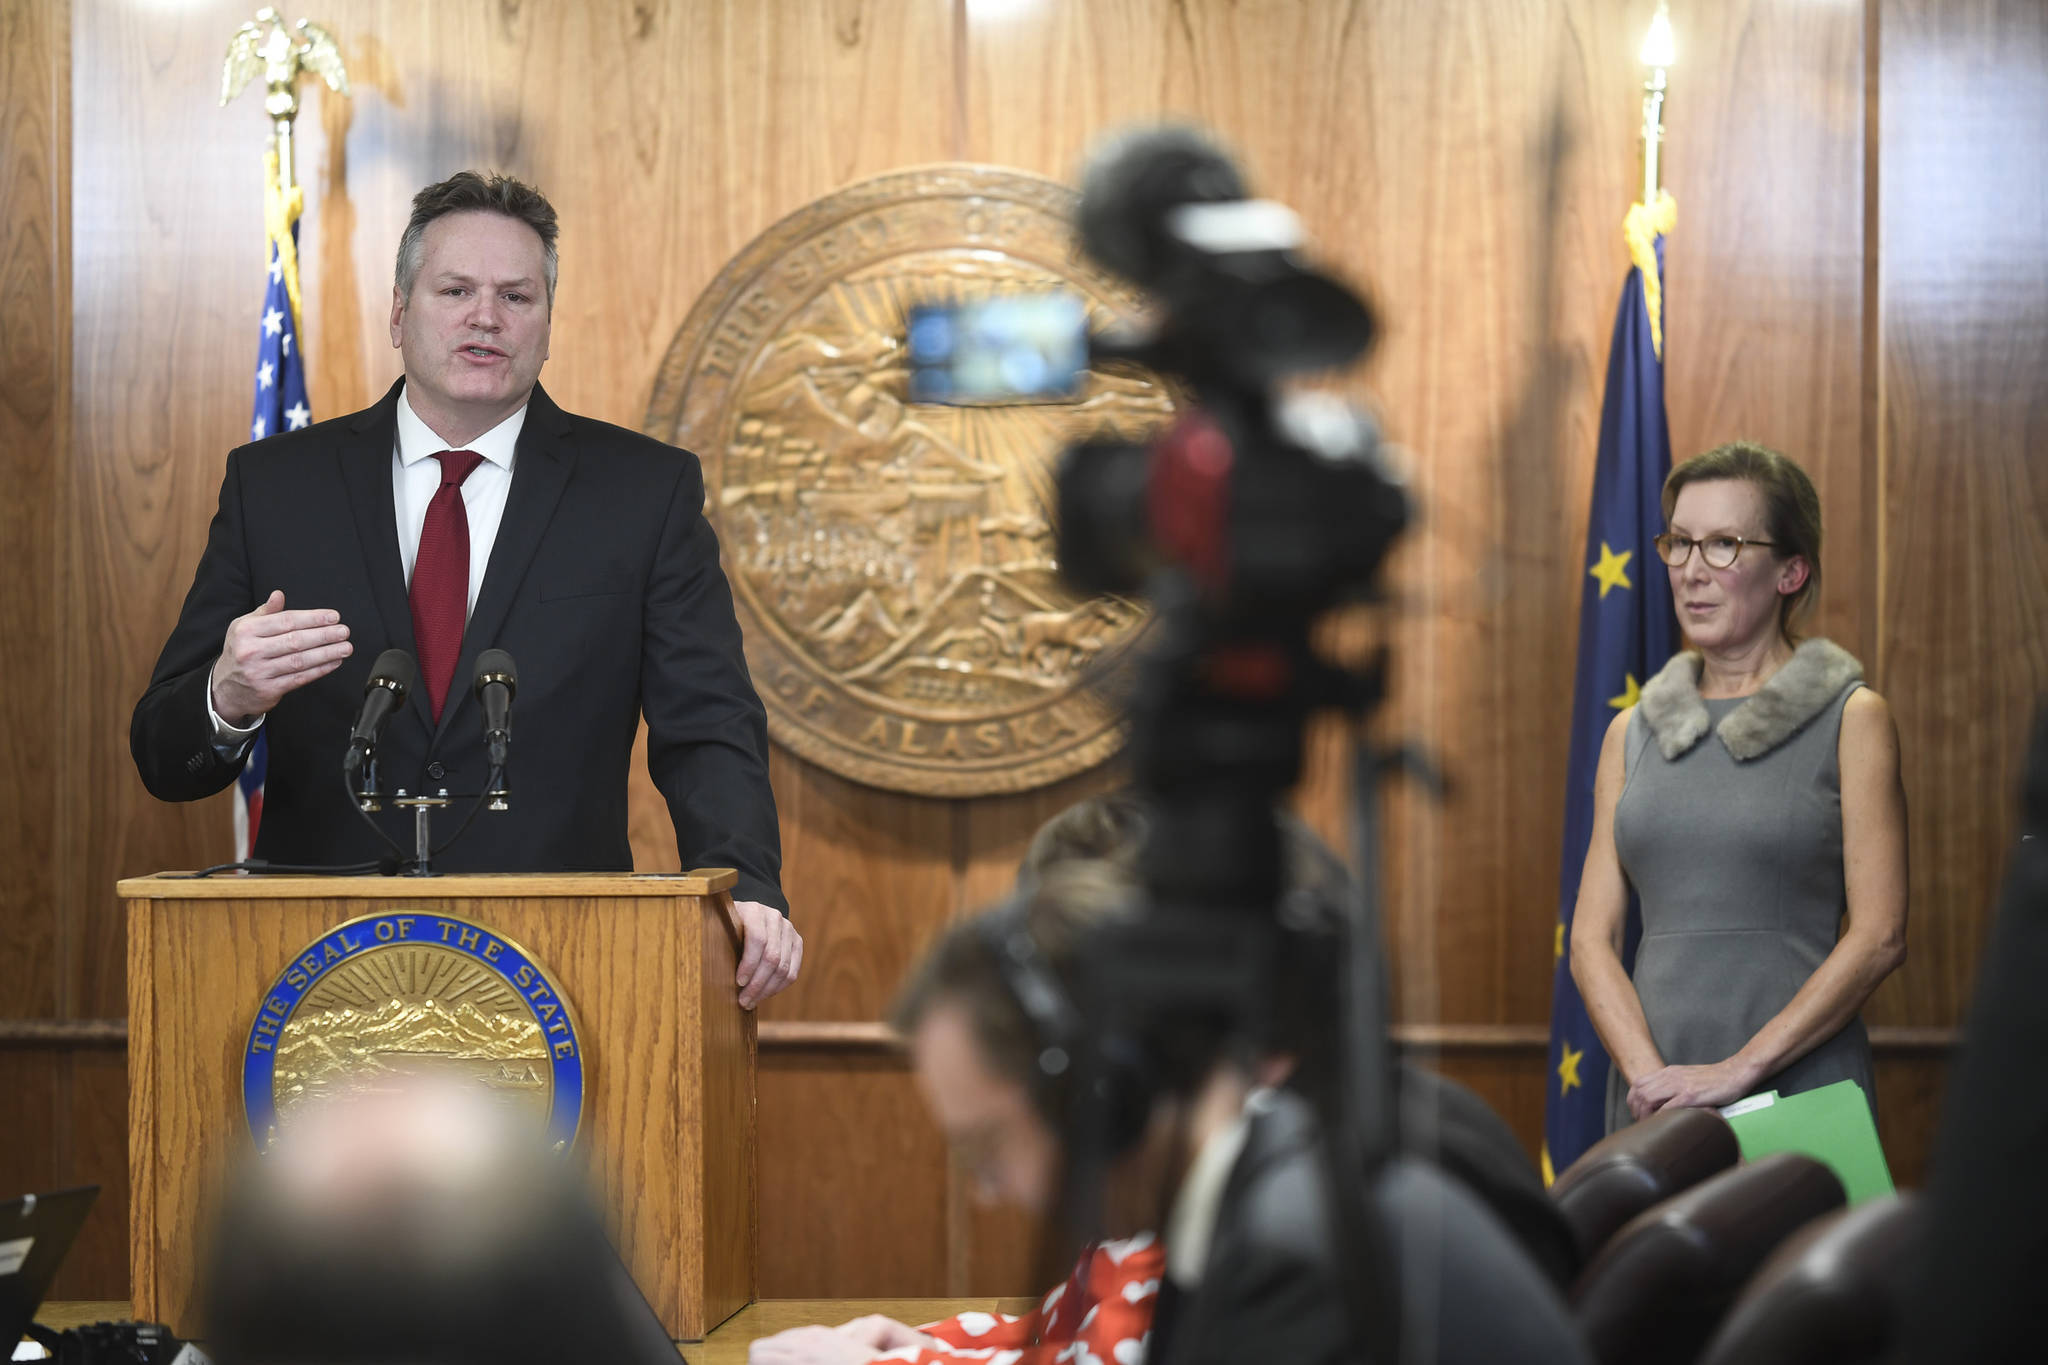 OMB Director Donna Arduin, right, listens to Gov. Mike Dunleavy announce his state budget during a press conference on Wednesday, Feb. 13, 2019. (Michael Penn | Juneau Empire)